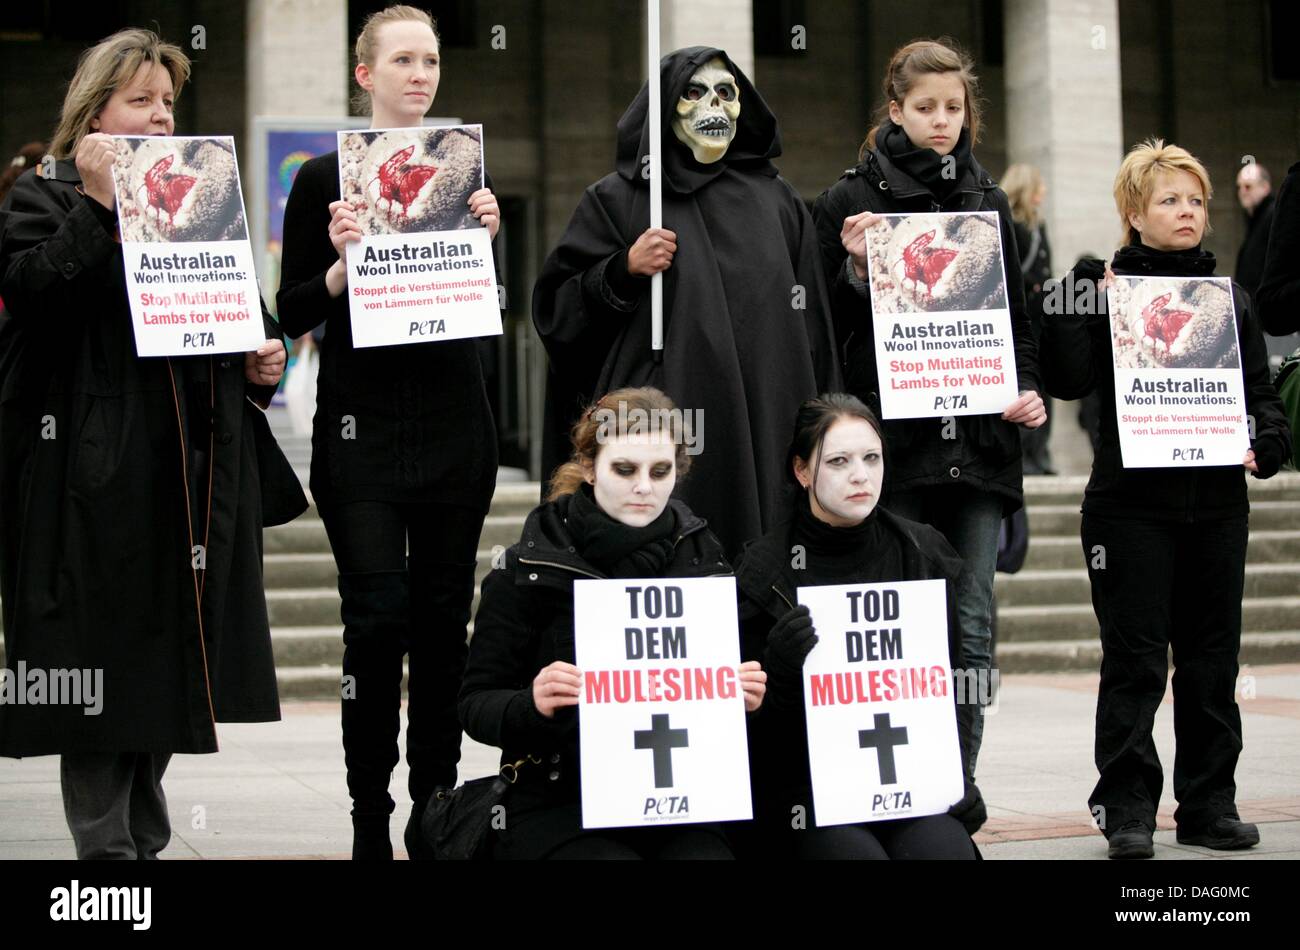 Activists of the animal rights group 'Peta' demonstrate against the